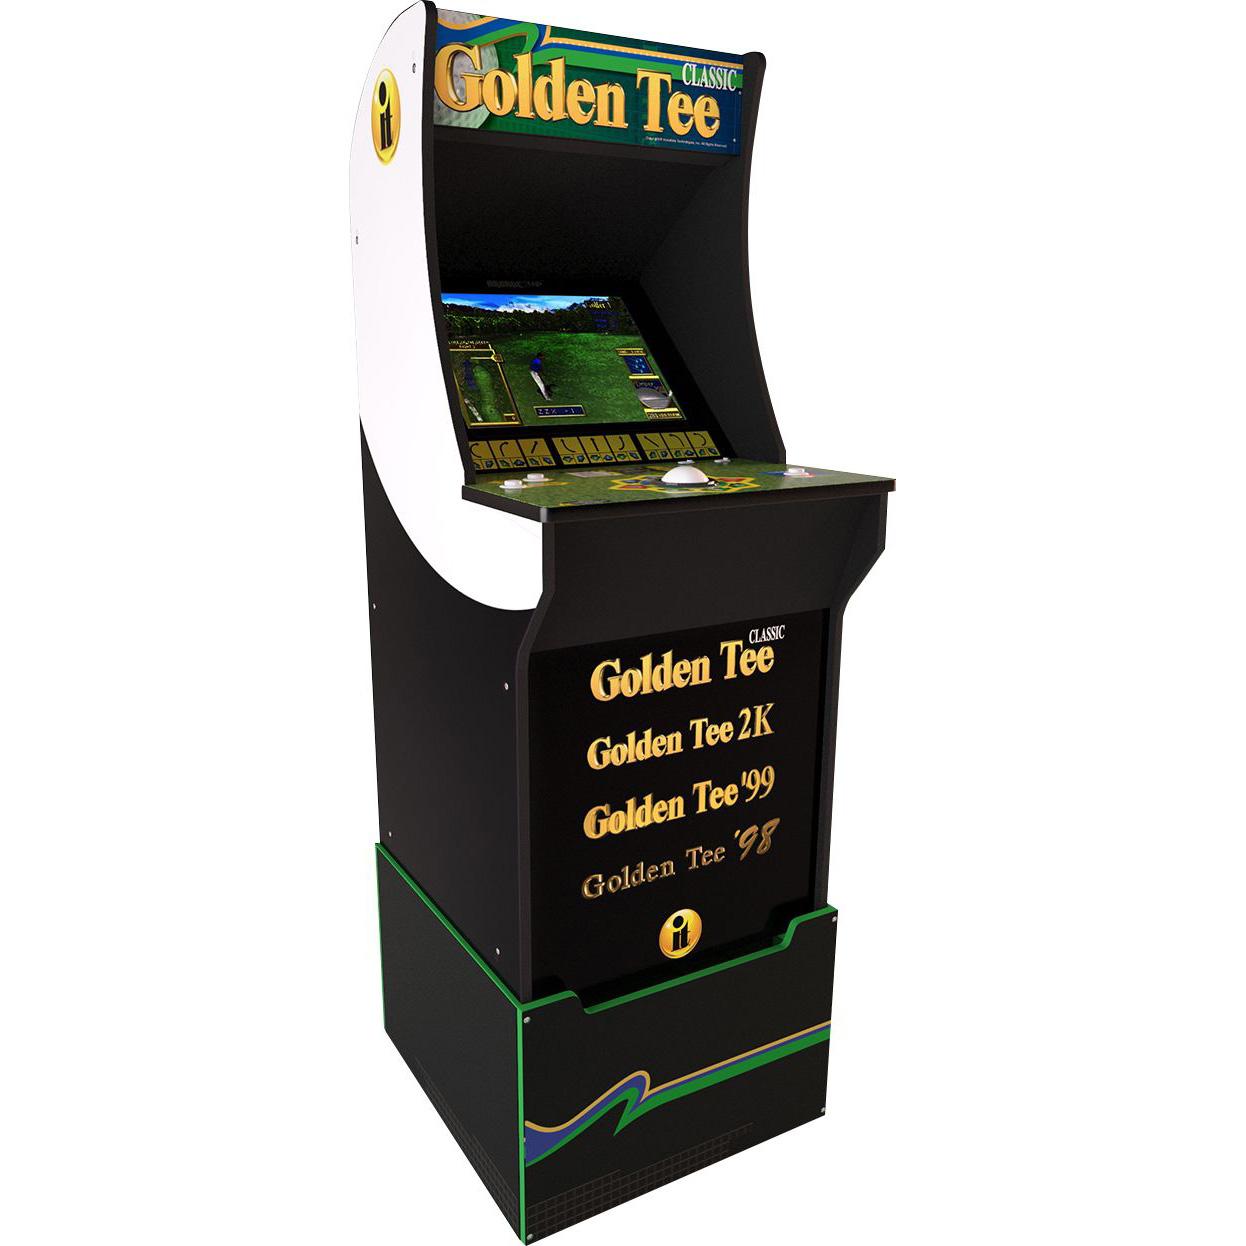 Arcade1Up Golden Tee Arcade Cabinet with Riser for $284.99 Shipped